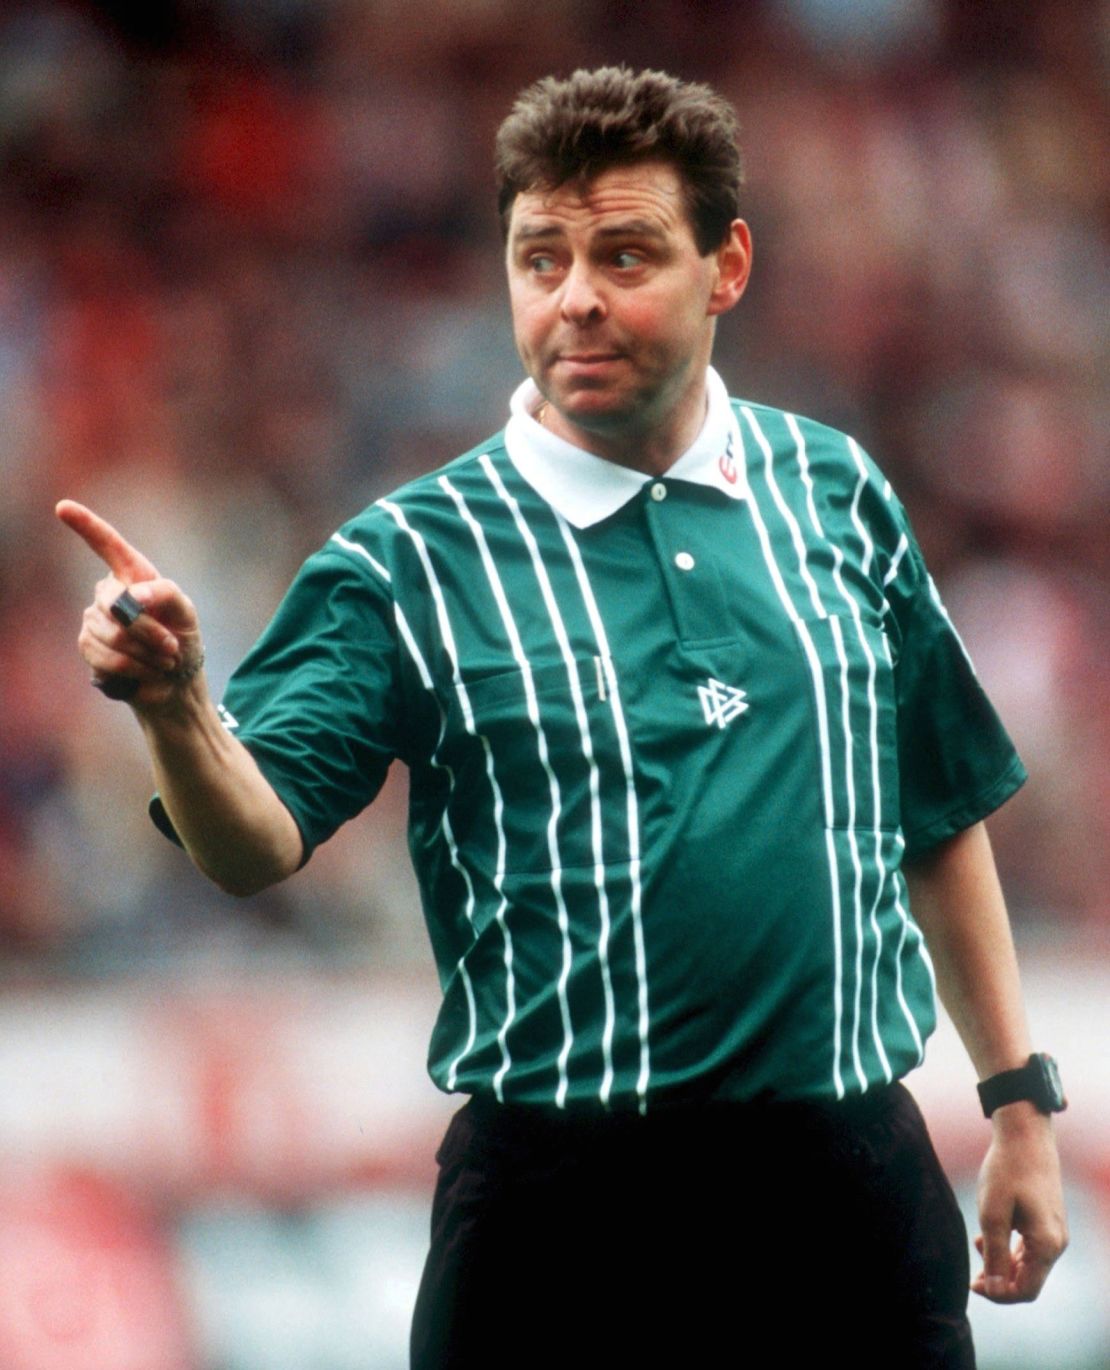 Bernd Heynemann was an international referee who officiated in both East Germany and then the united country.